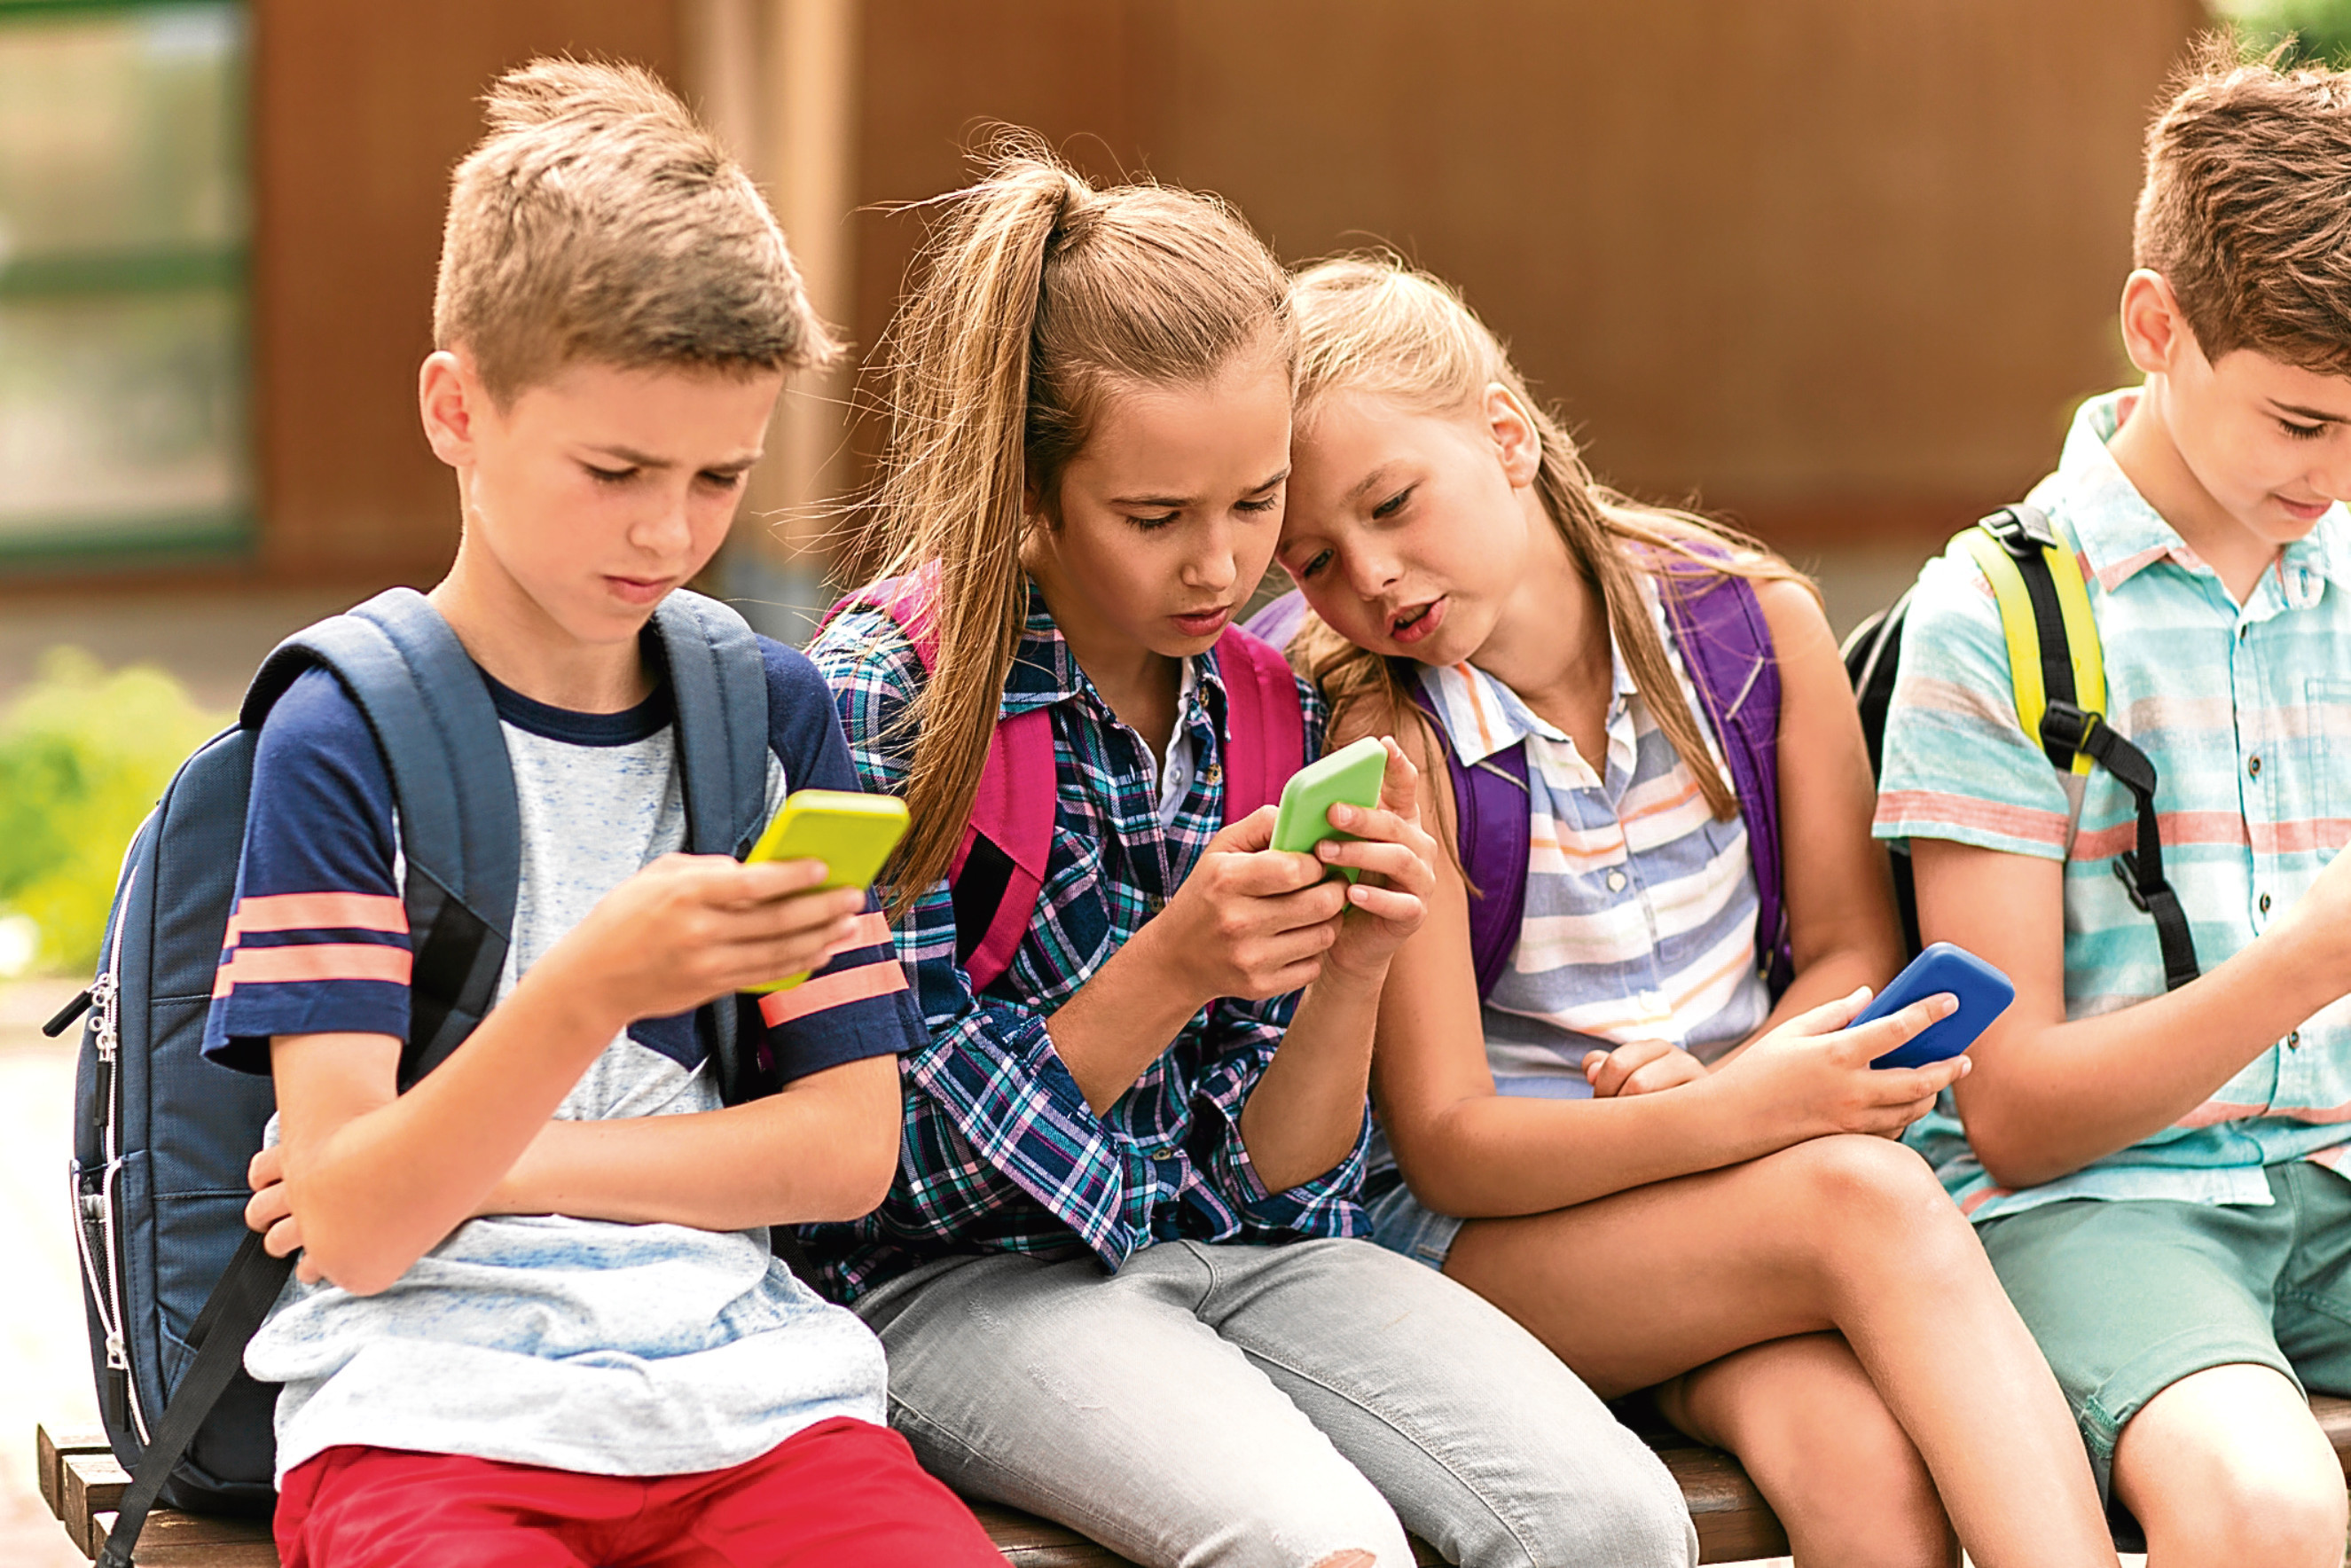 Donald Macleod is in favour of a phone ban for kids (iStock)